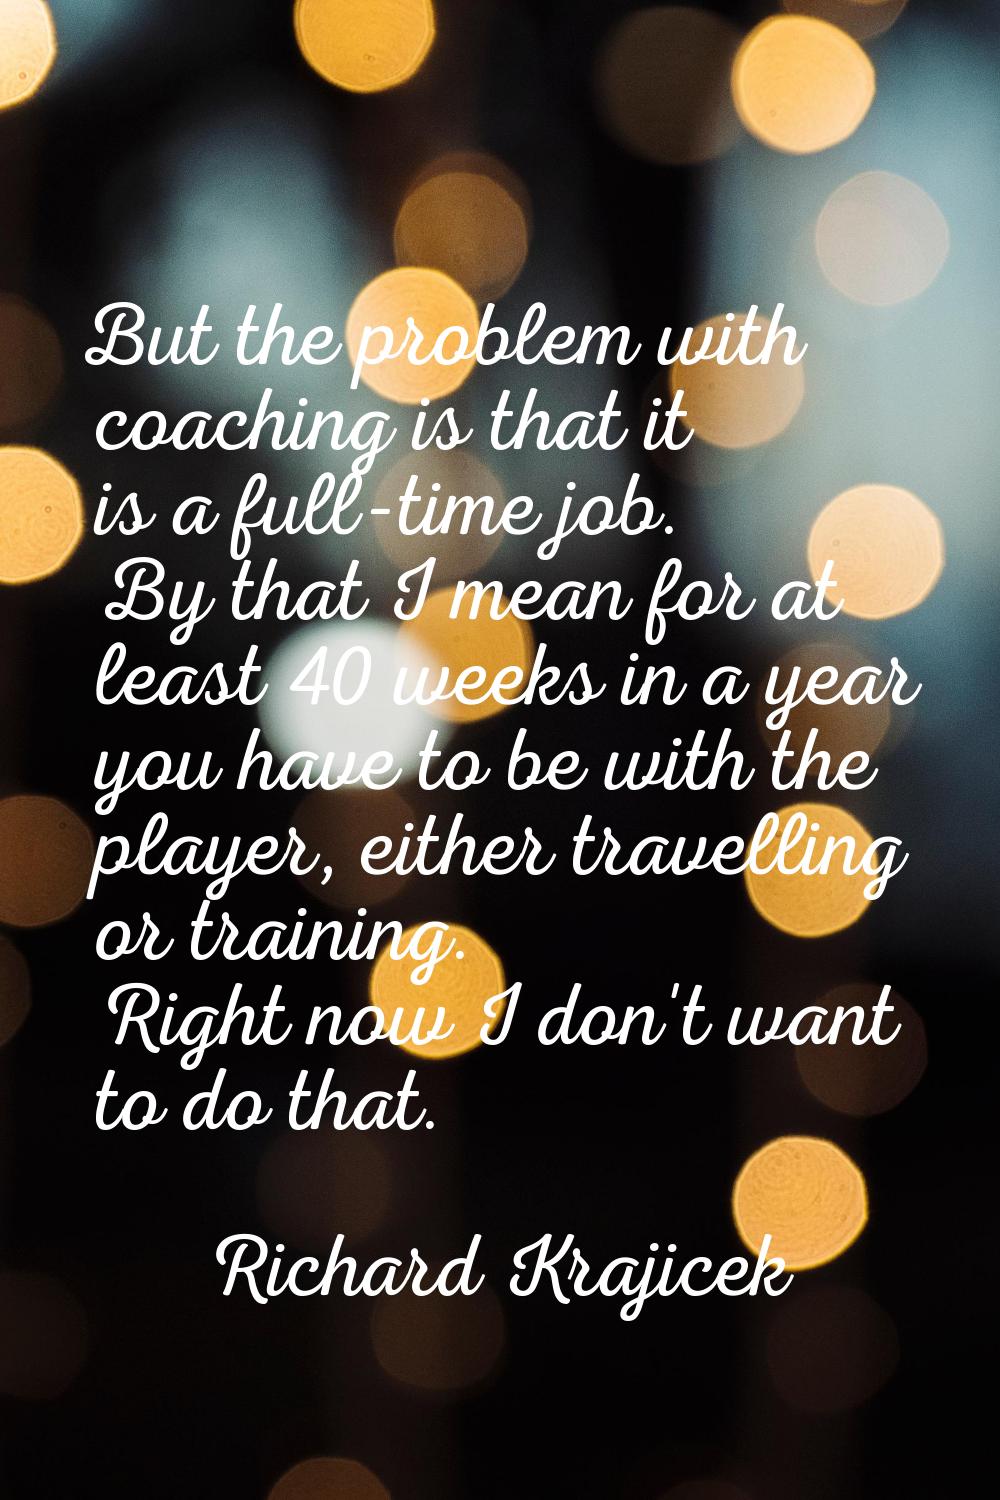 But the problem with coaching is that it is a full-time job. By that I mean for at least 40 weeks i